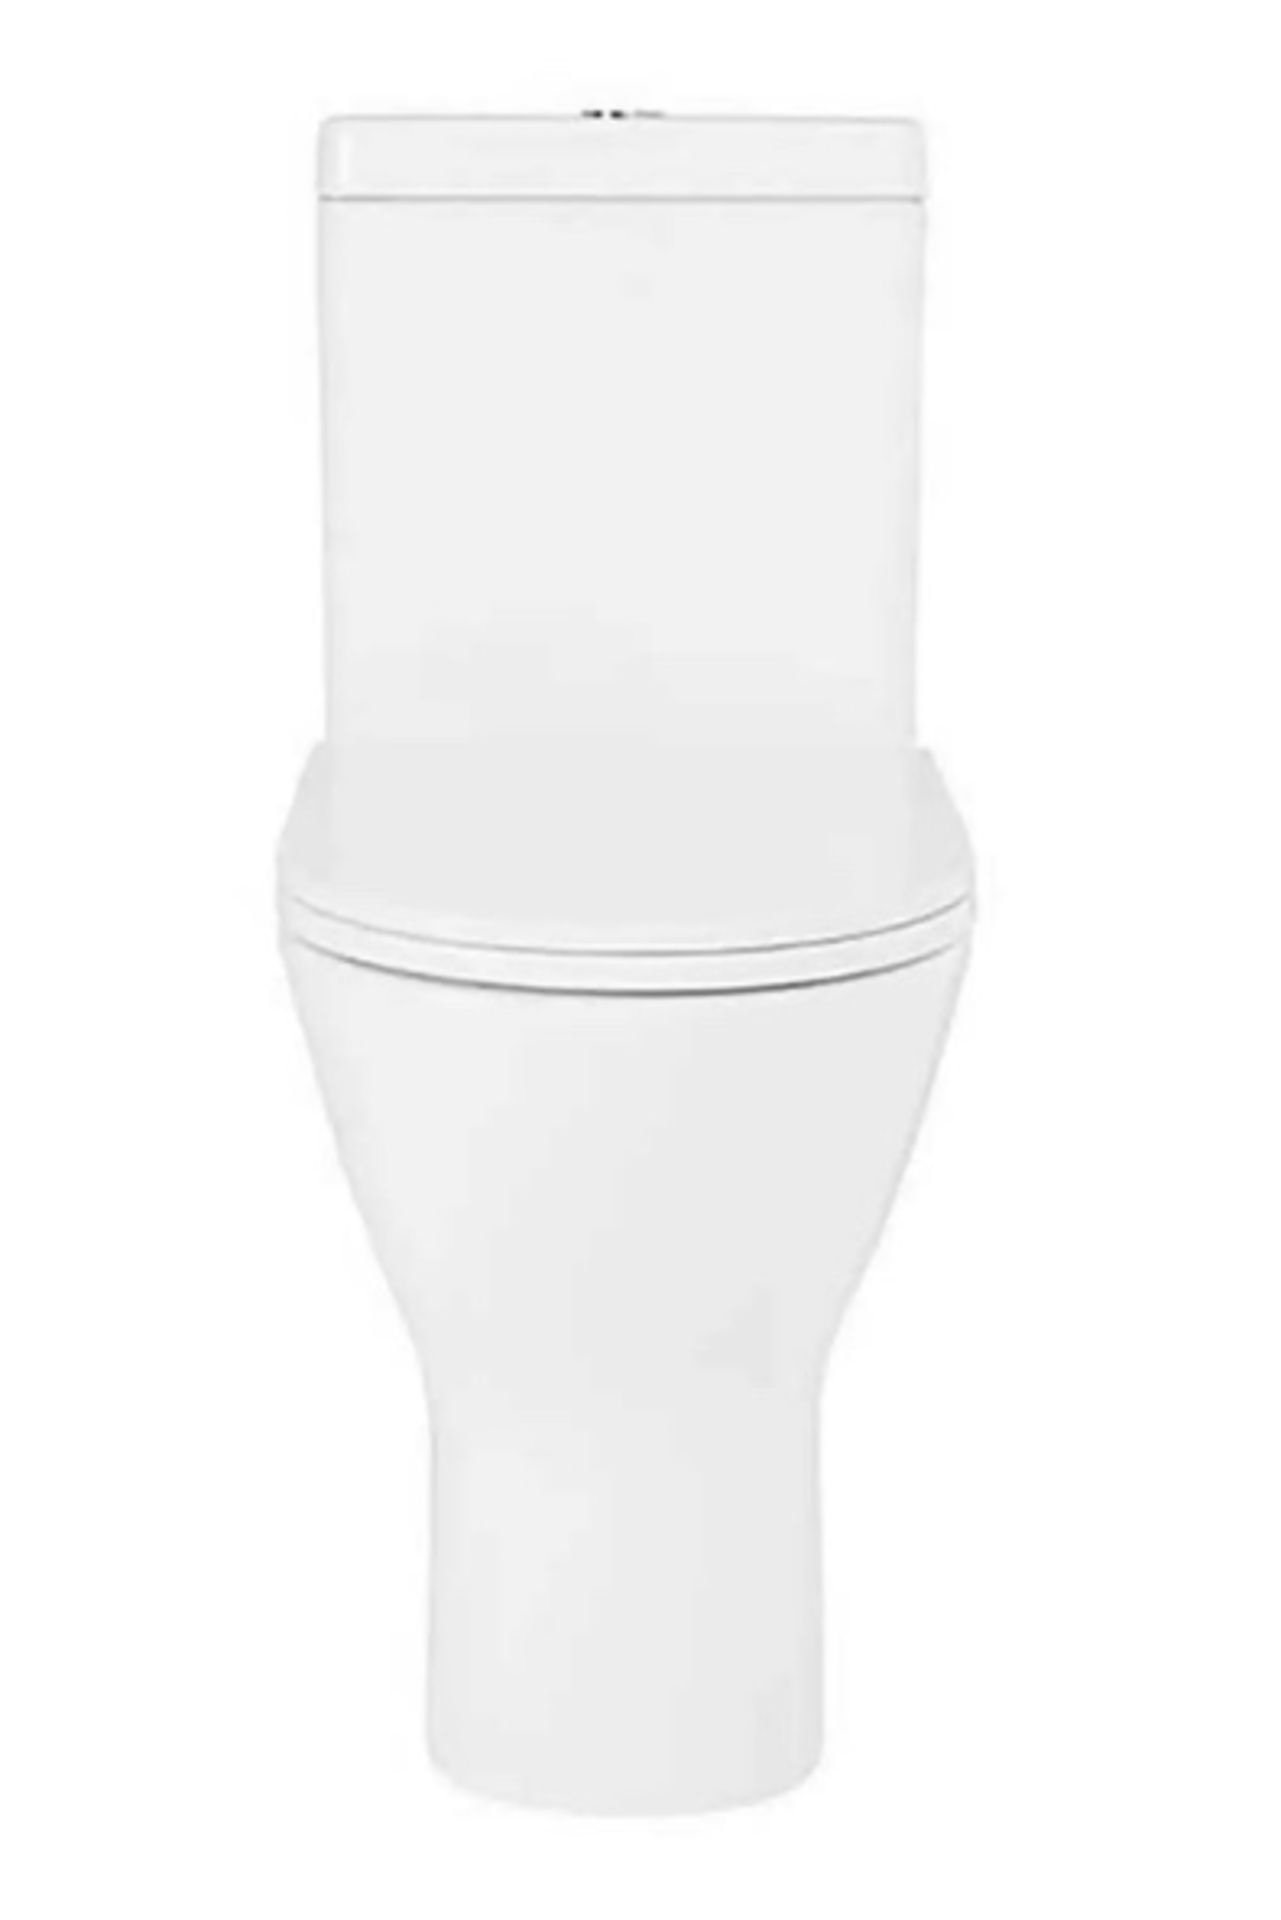 Brand New Falcon Comfort Rimless Open Back Close Coupled Toilet Soft Close Toilet Seat RRP £424